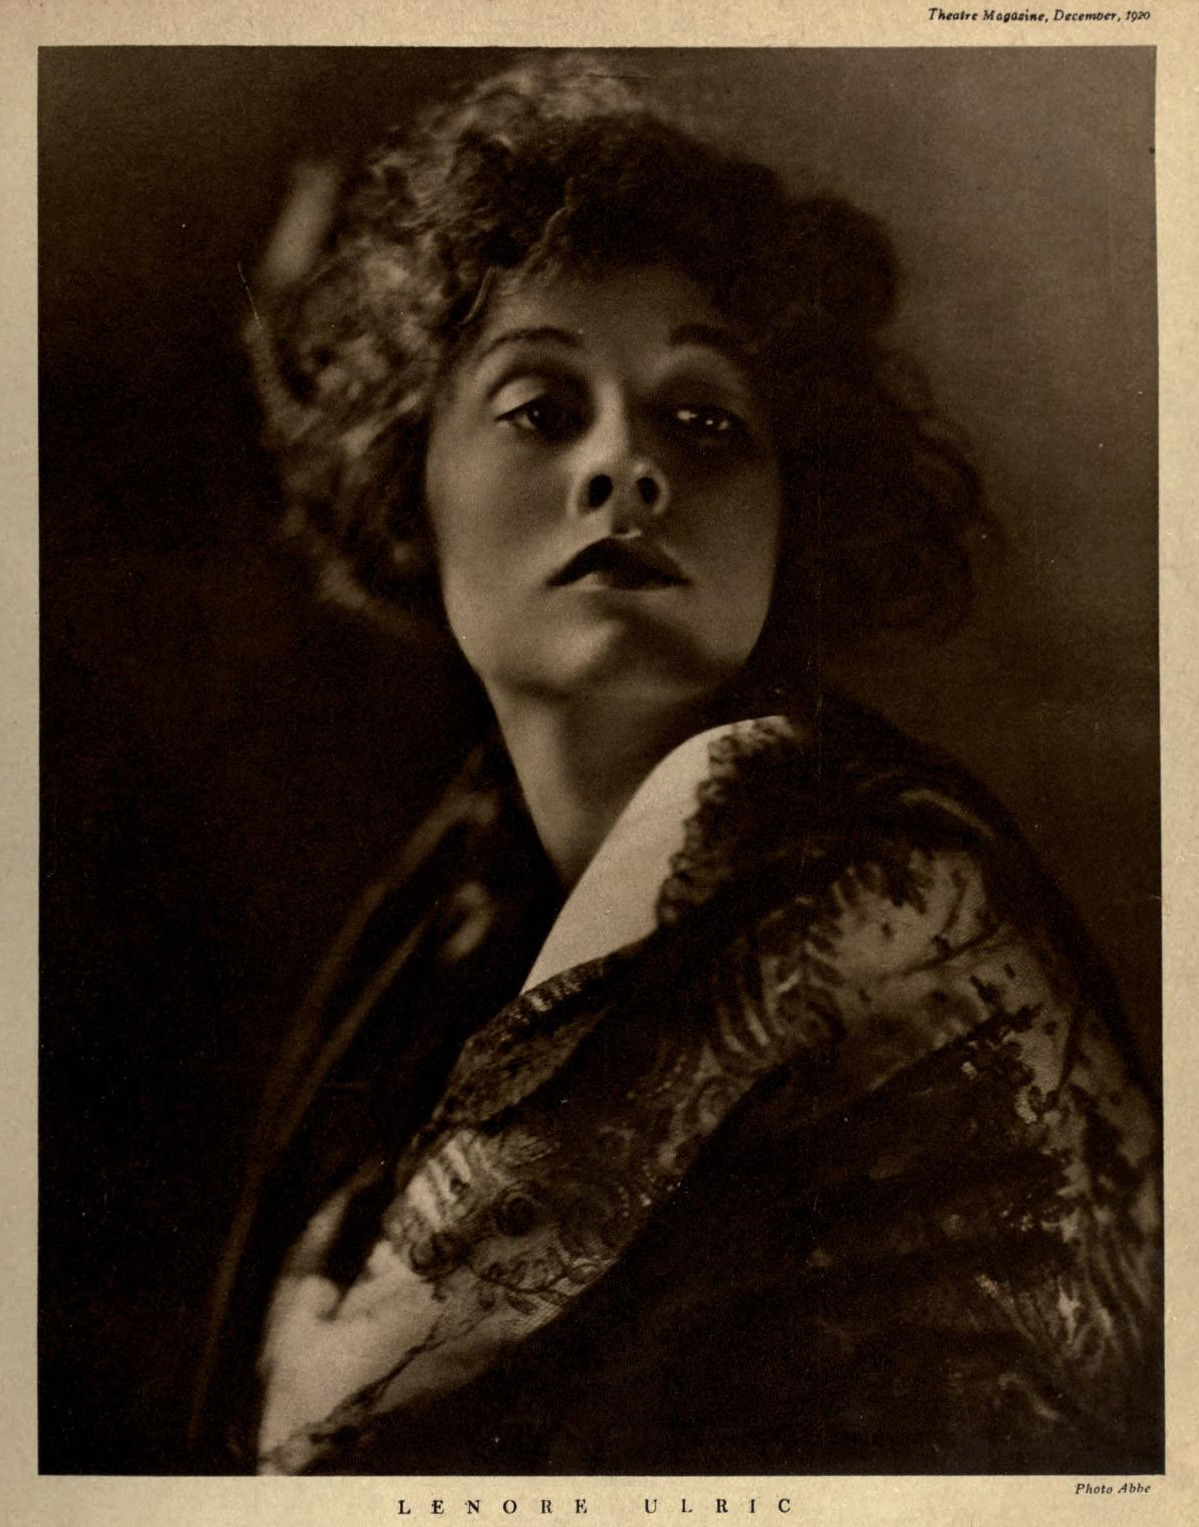 hauntedbystorytelling: James Abbe :: Actress Lenore Ulric. Published in Theatre magazine,